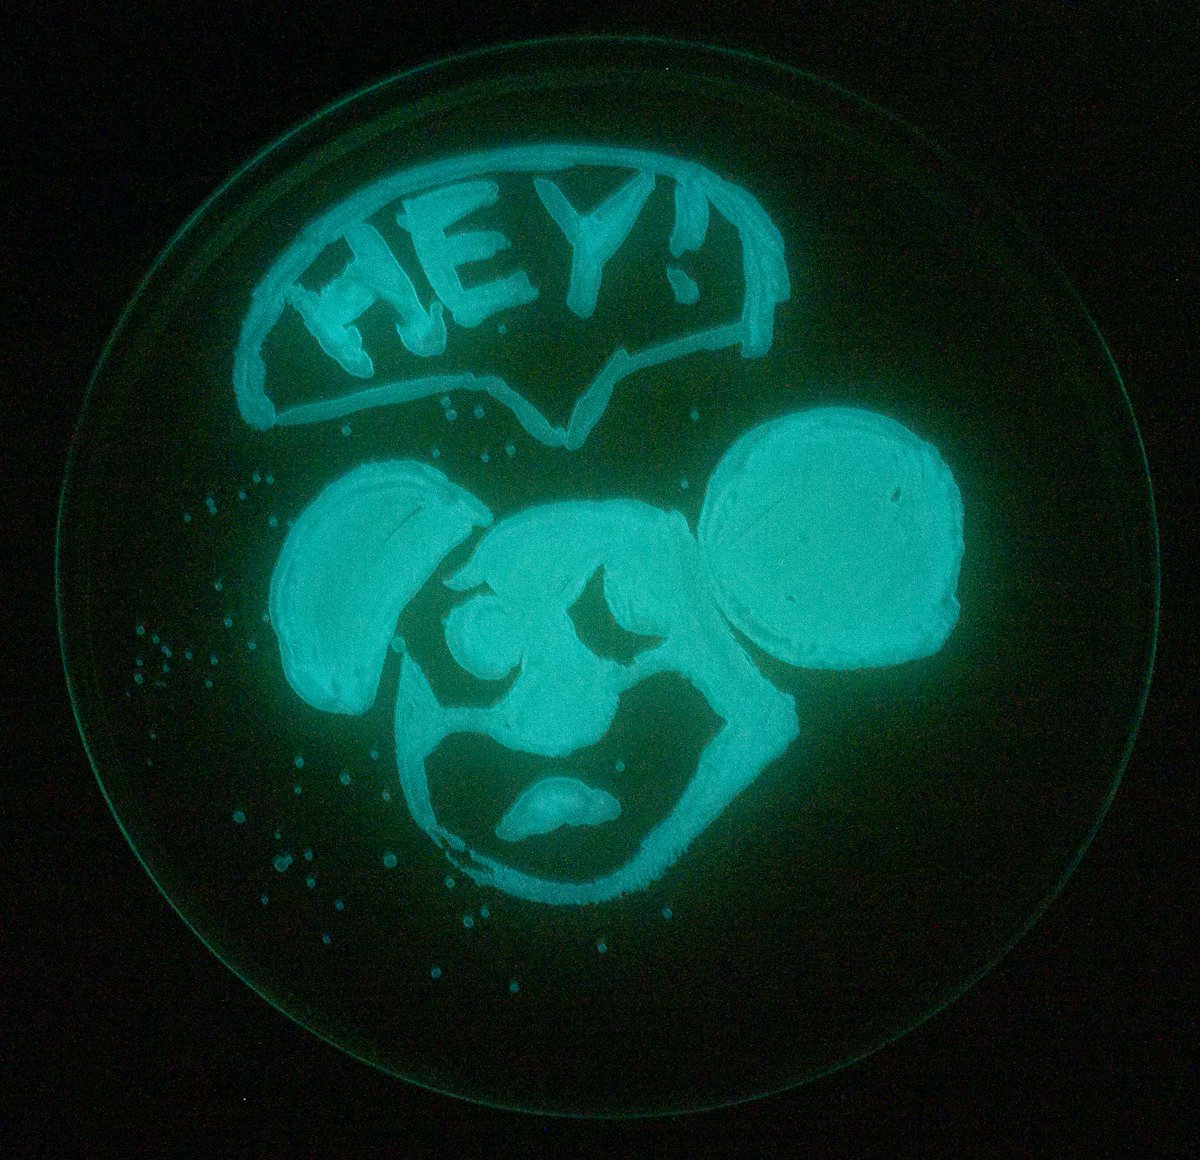 The #Bioluminescent #AgarArt that our #ArtOfScience campers made yesterday turned out great! Here are a few examples. @sandtcase @MissouriSandT